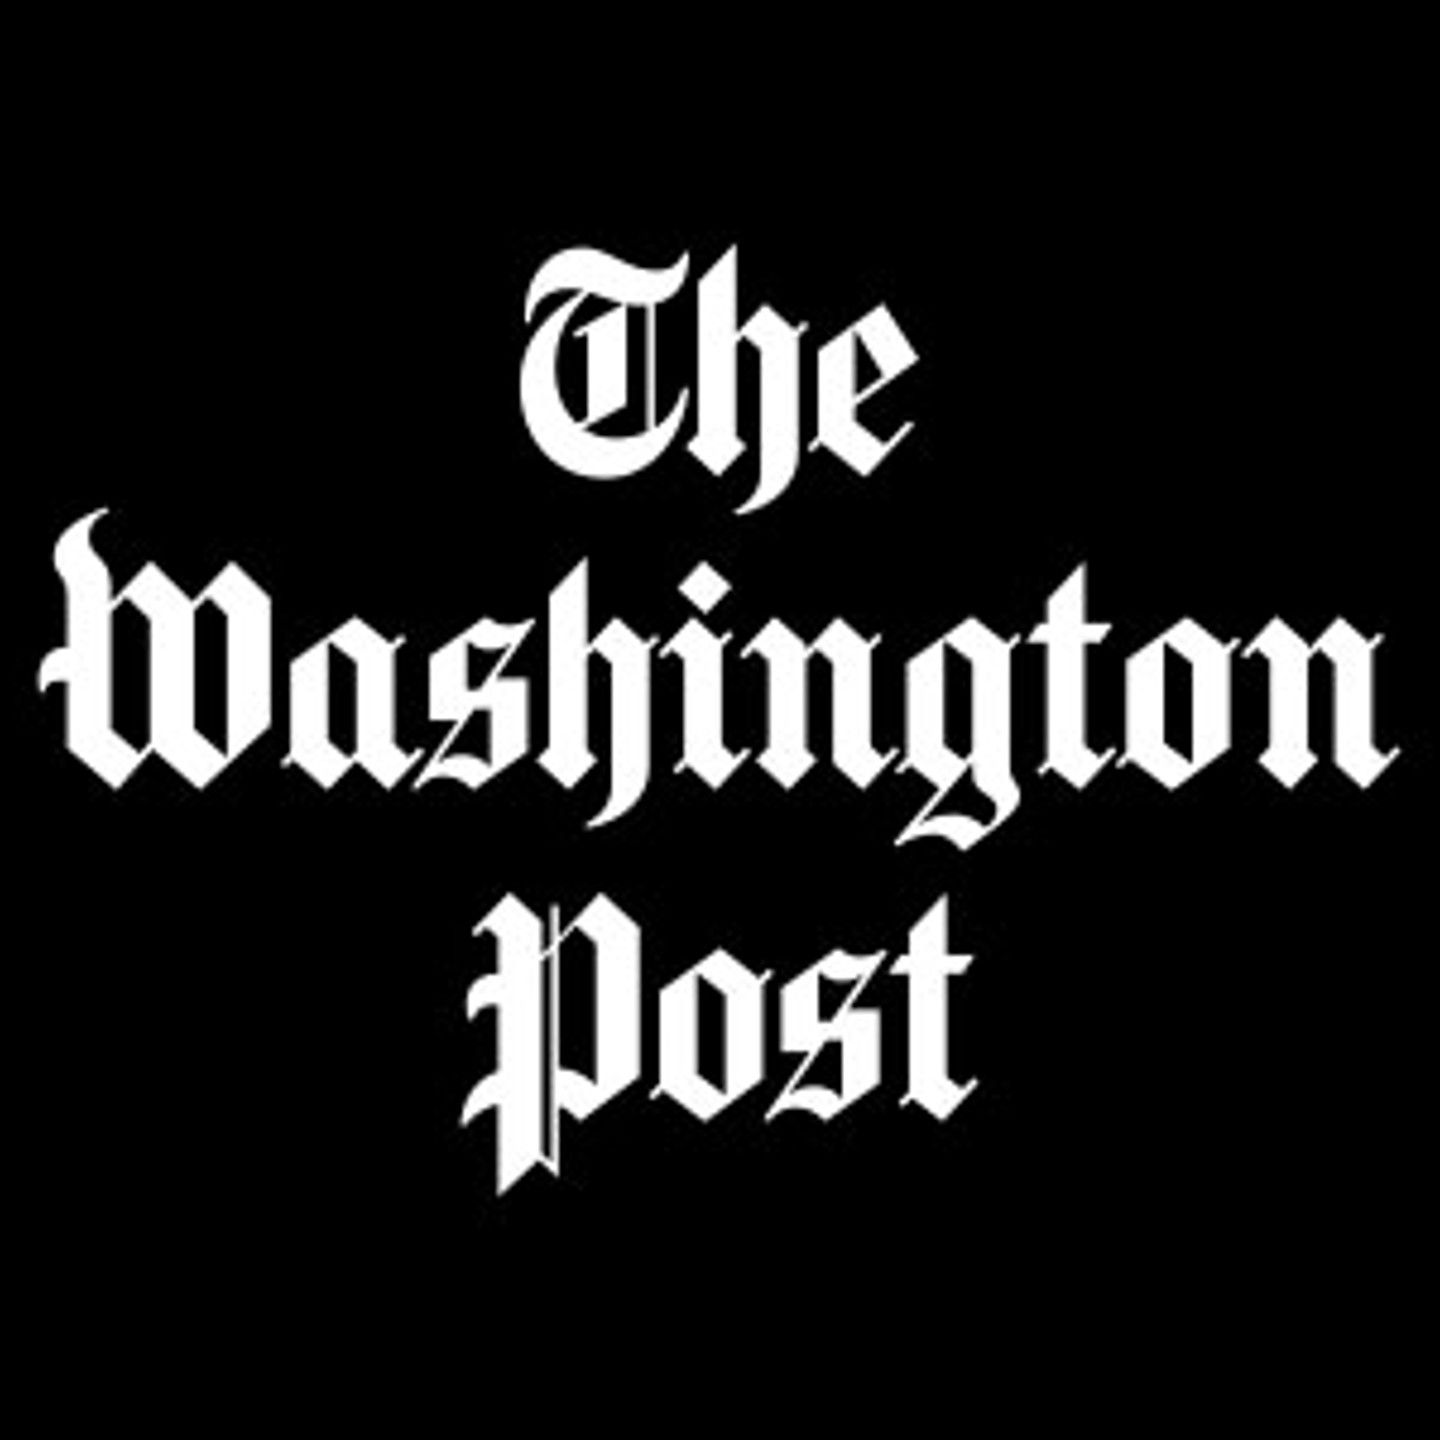 Top Rated by the Washington Post